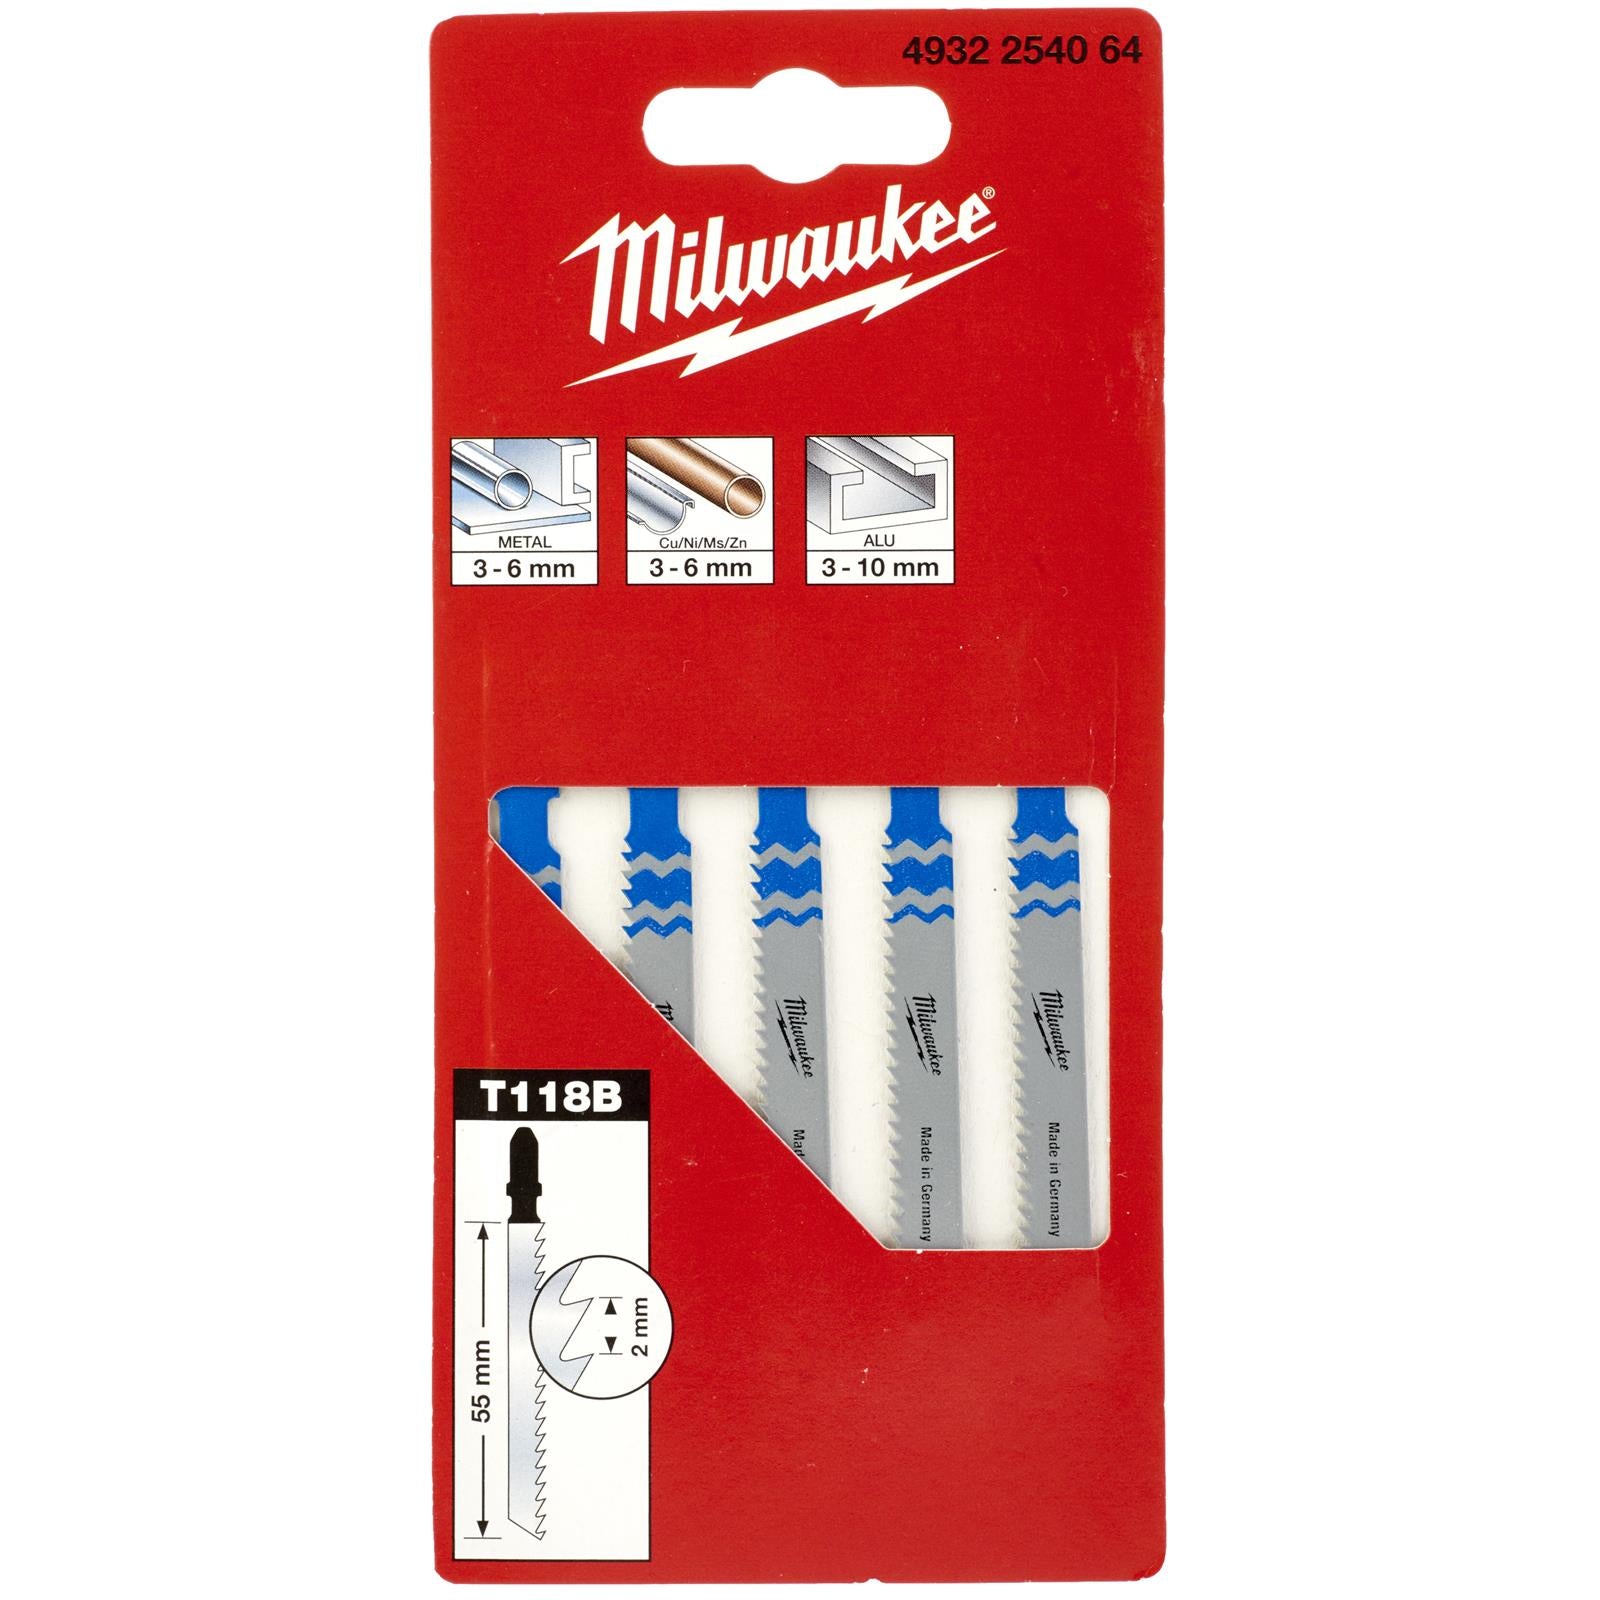 Milwaukee Jigsaw Blades for Metal 5 Pack Traditional Blade 55mm x 2mm T118B